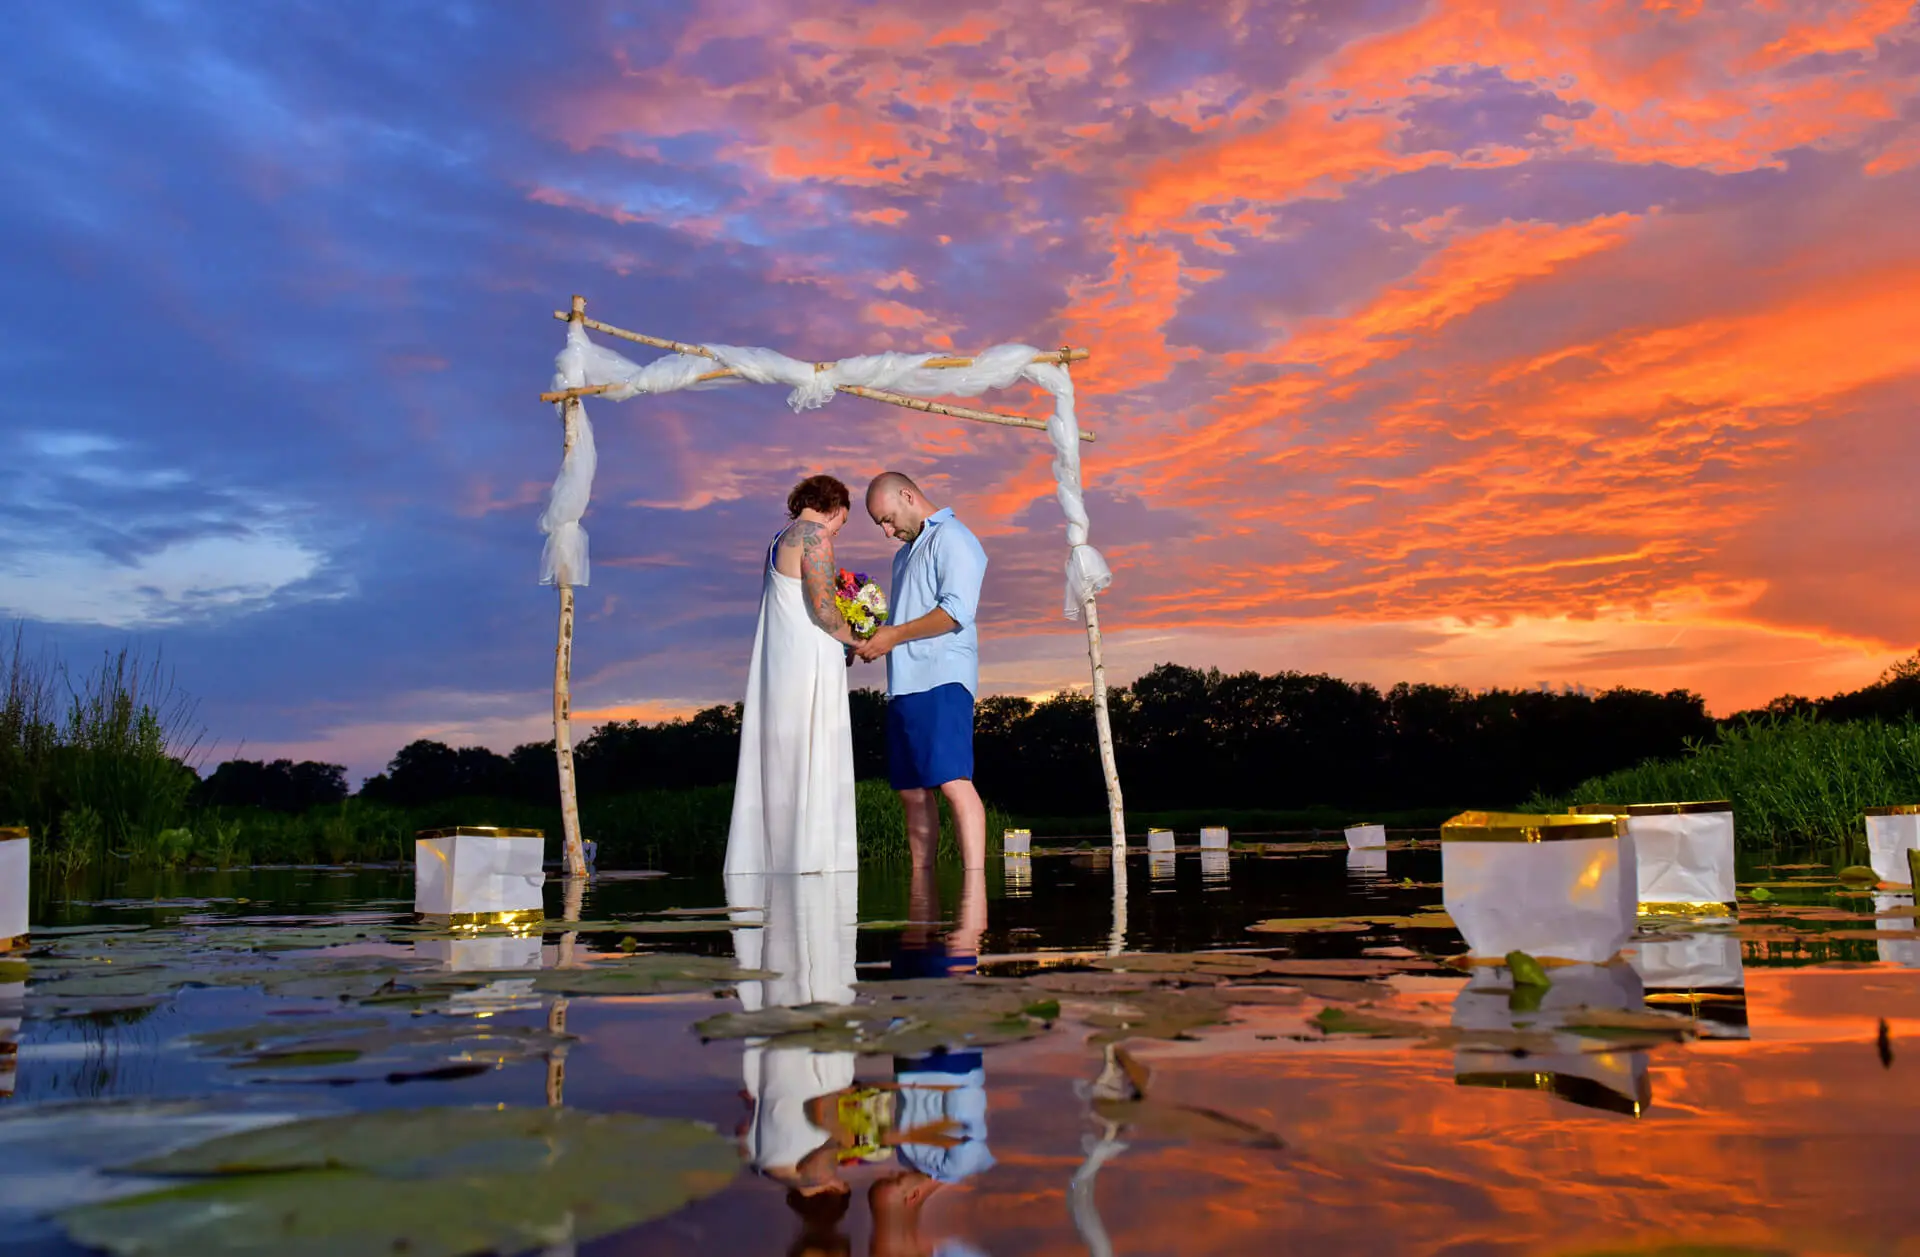 Fantastic sunset wedding on a sand bank in the middle of a river in Jackson, Michigan makes for a gorgeous, once in a lifetime wedding photo.